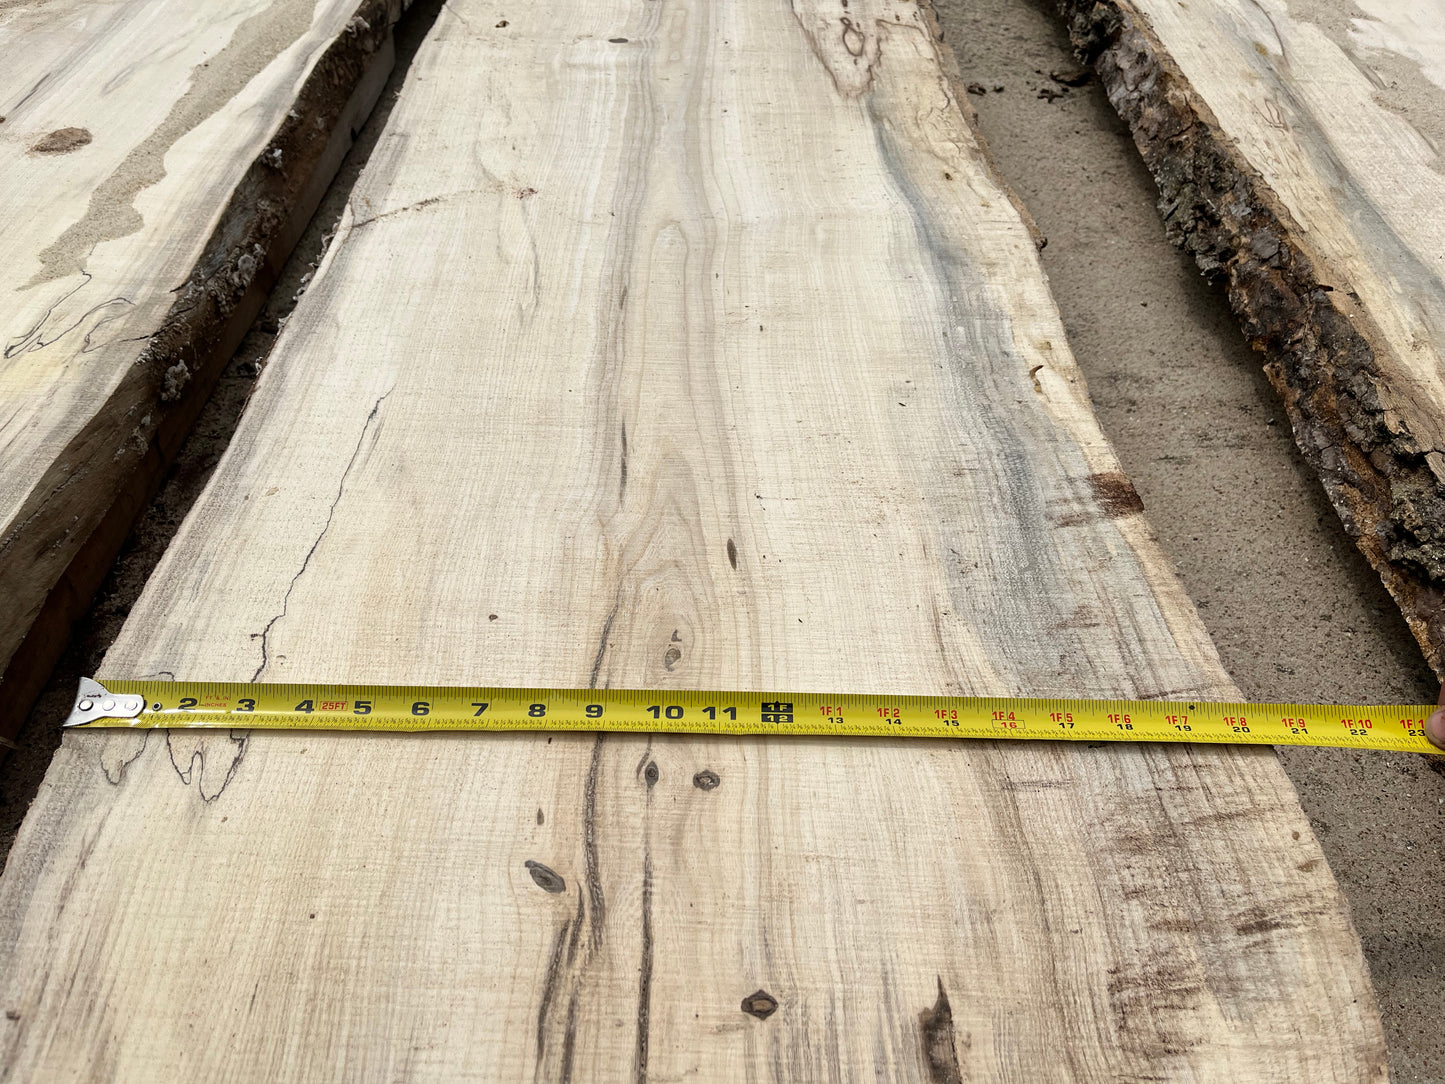 1" Thick Rough Cut Pecan Live Edge Slabs for Charcuterie Boards, Furniture, Tables and Bar Tops, Shelves, and More - Kiln Dried